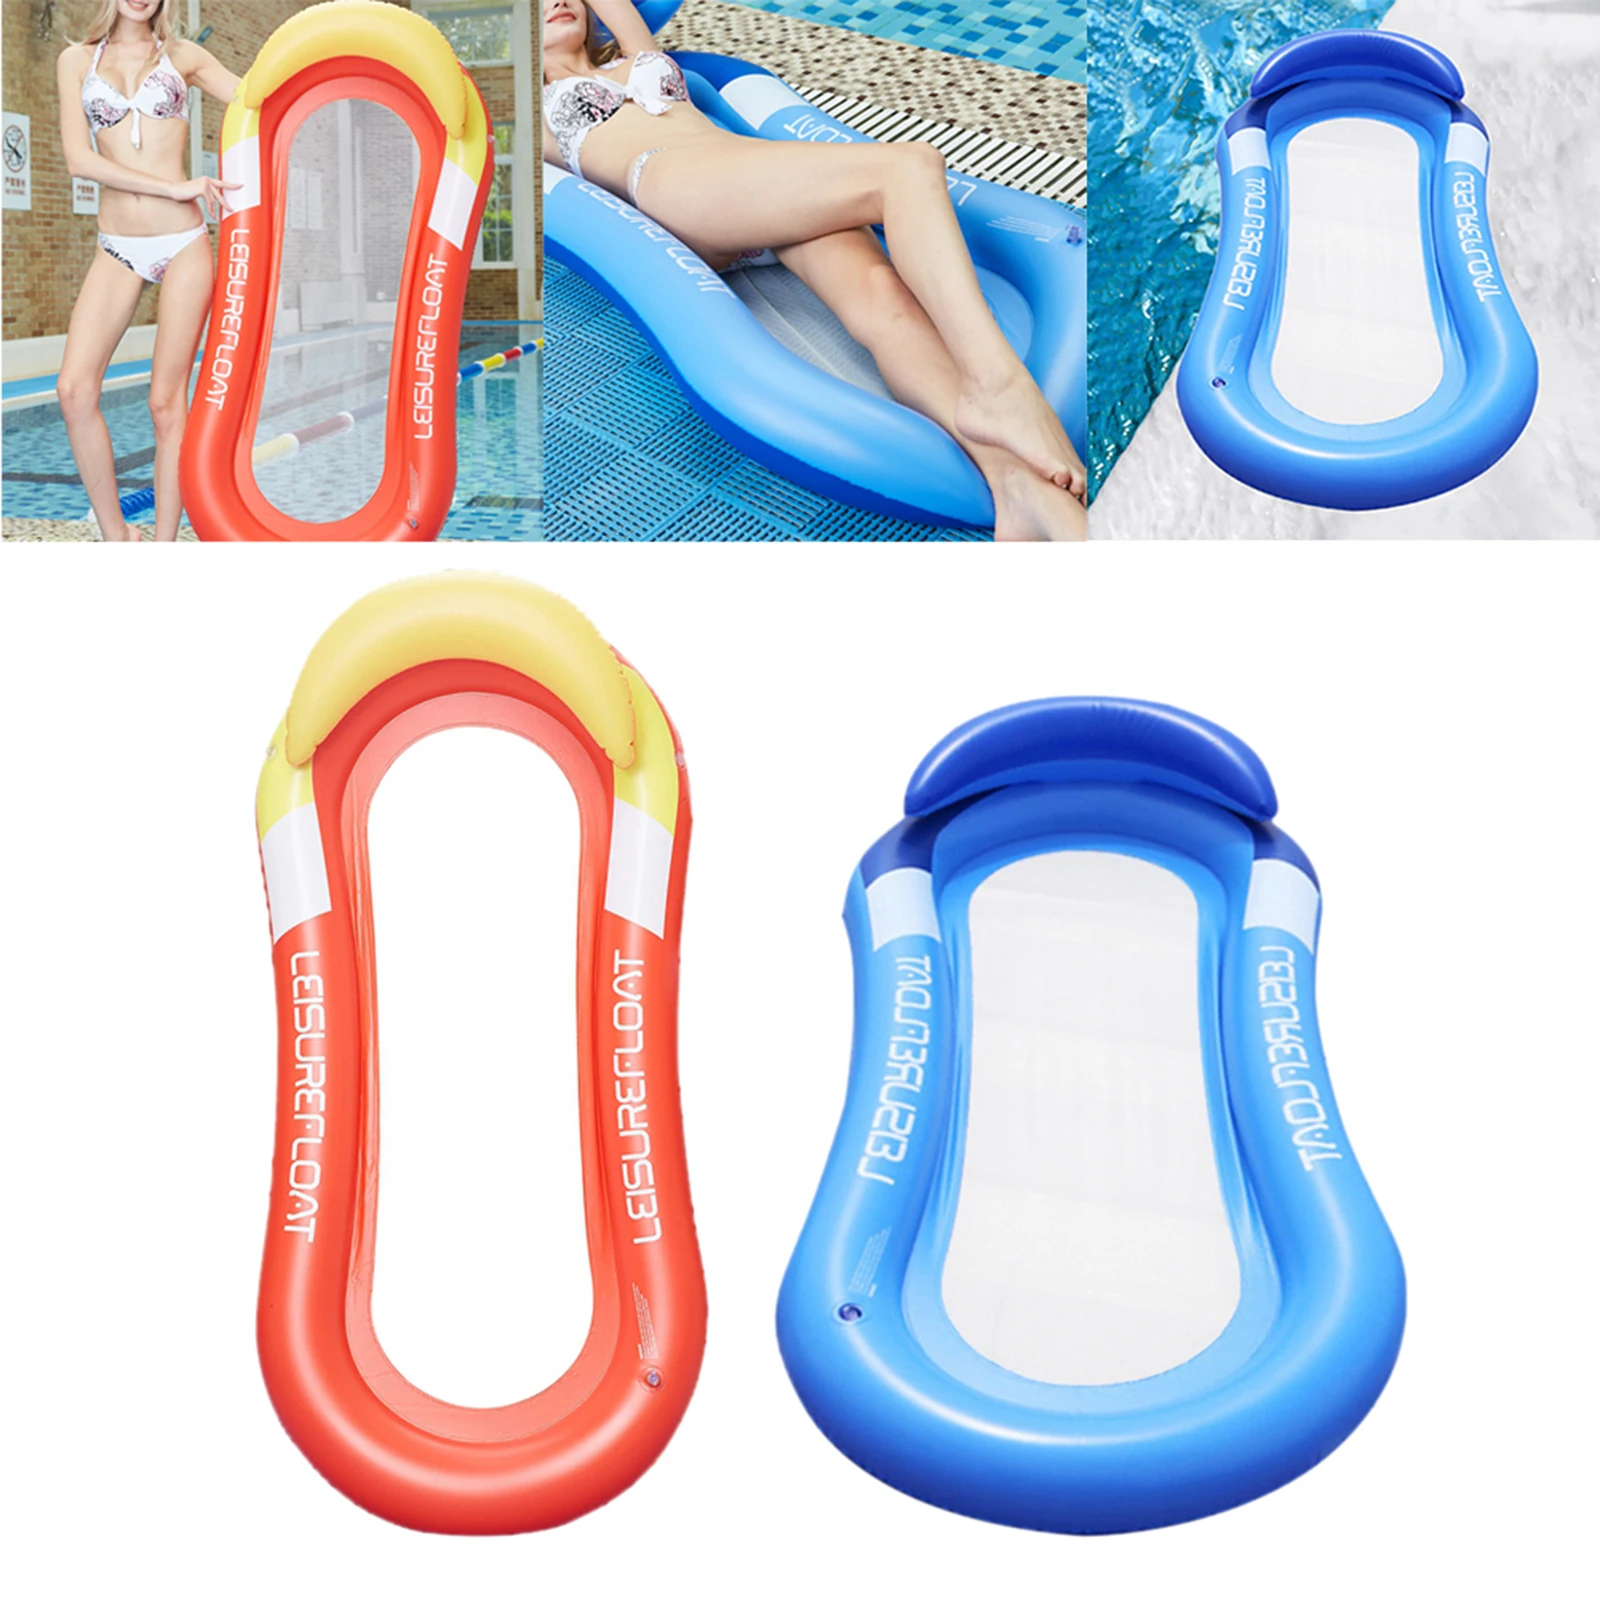 Inflatable Pool Float Bed Lilo, Water Hammock Swimming Pool Floats Mesh Floater for Adults,Kid Water Lounge Chair Water Sofa